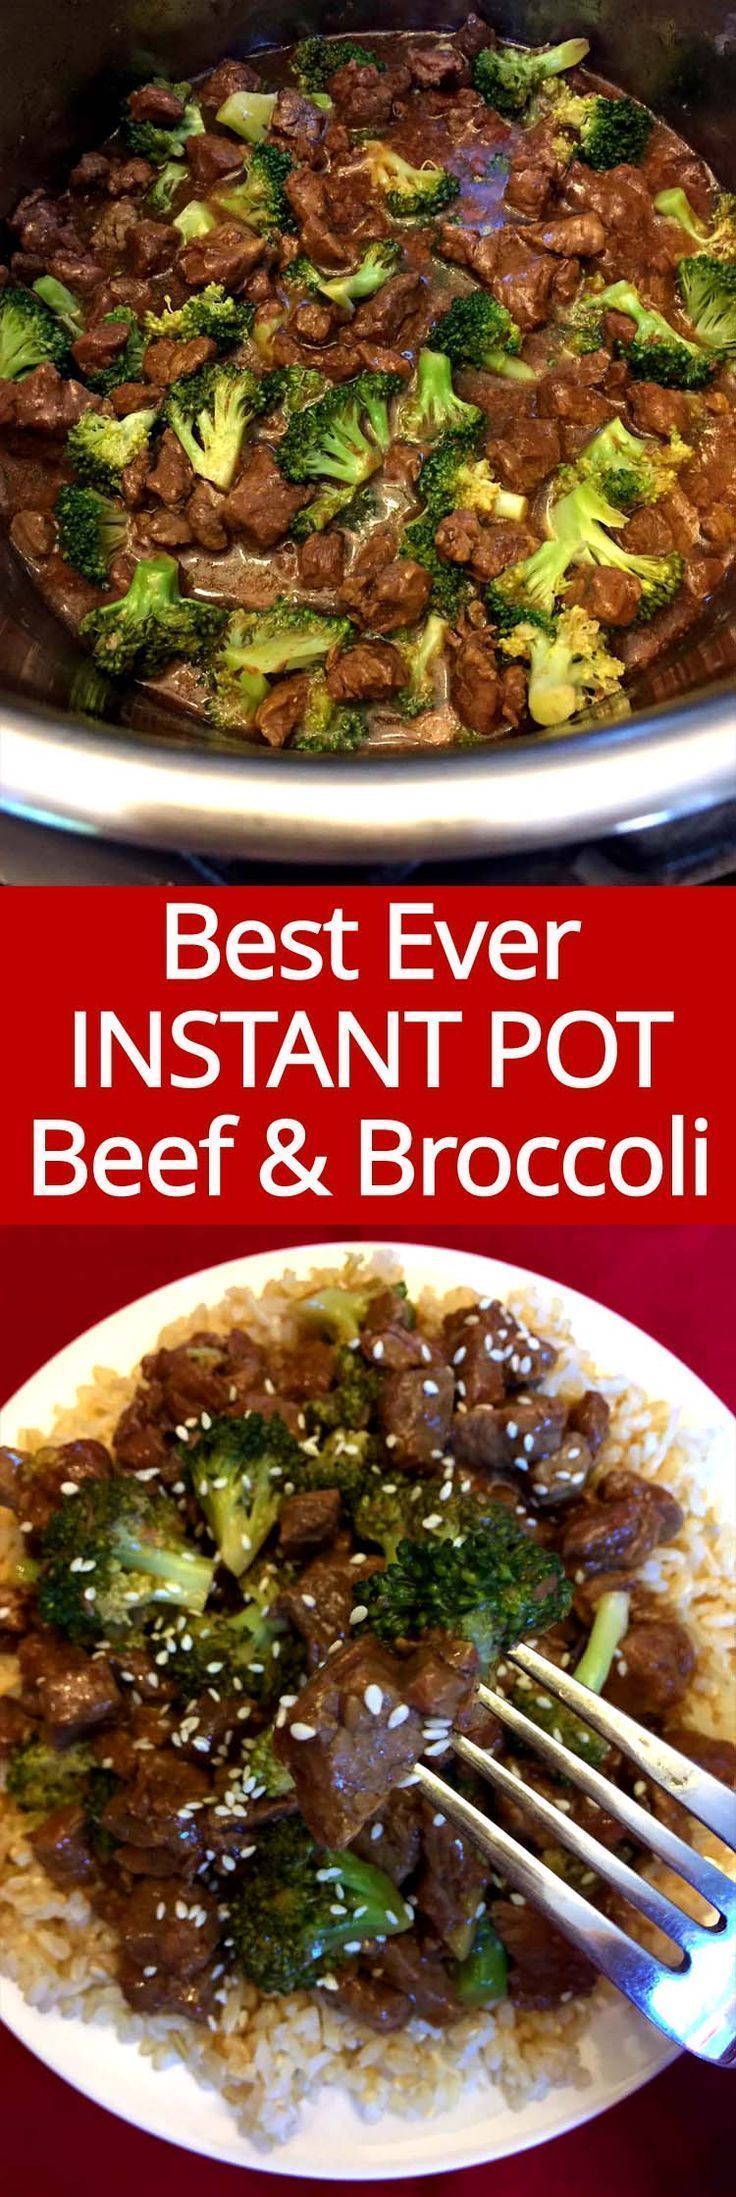 Instant Pot Beef And Broccoli -   7 healthy recipes Beef steak ideas